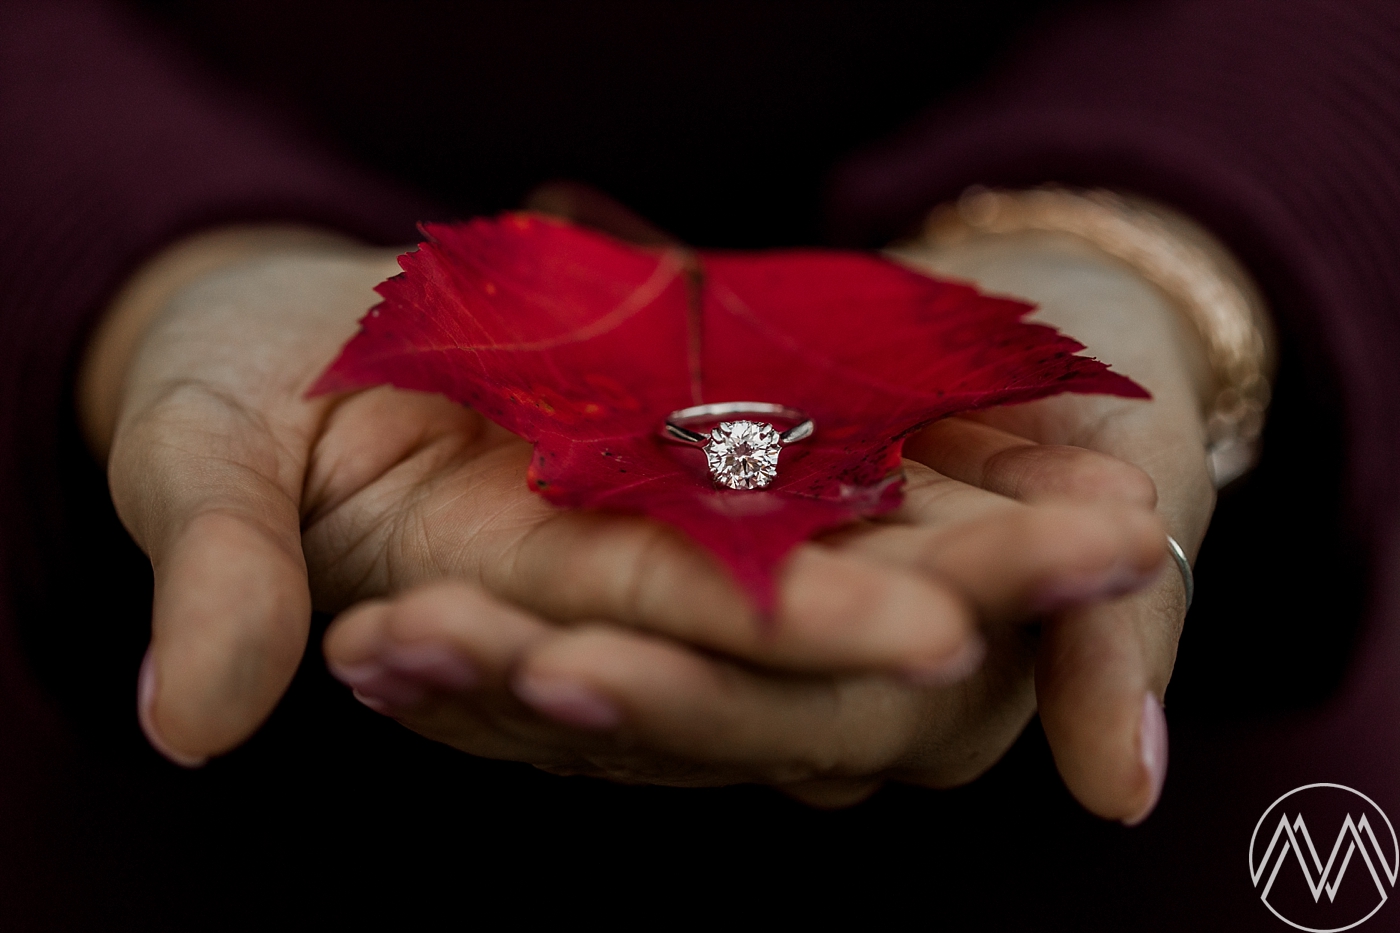 Fall proposal for high-school sweethearts in North Bend, WA. Photographed by PNW Wedding Photographer, Megan Montalvo Photography.